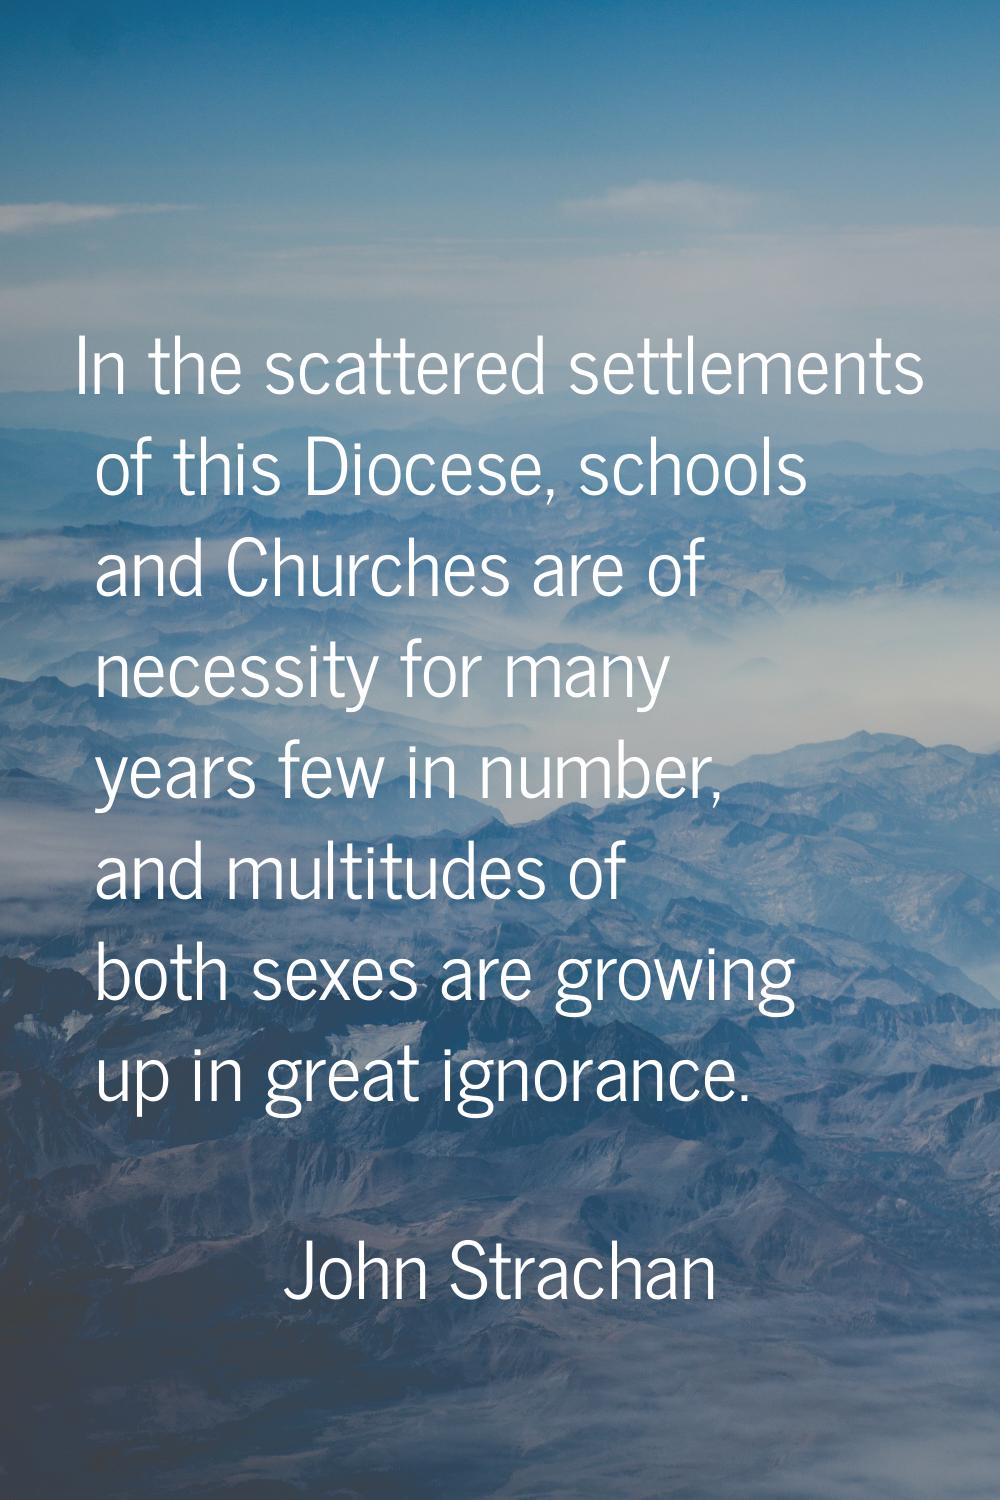 In the scattered settlements of this Diocese, schools and Churches are of necessity for many years 